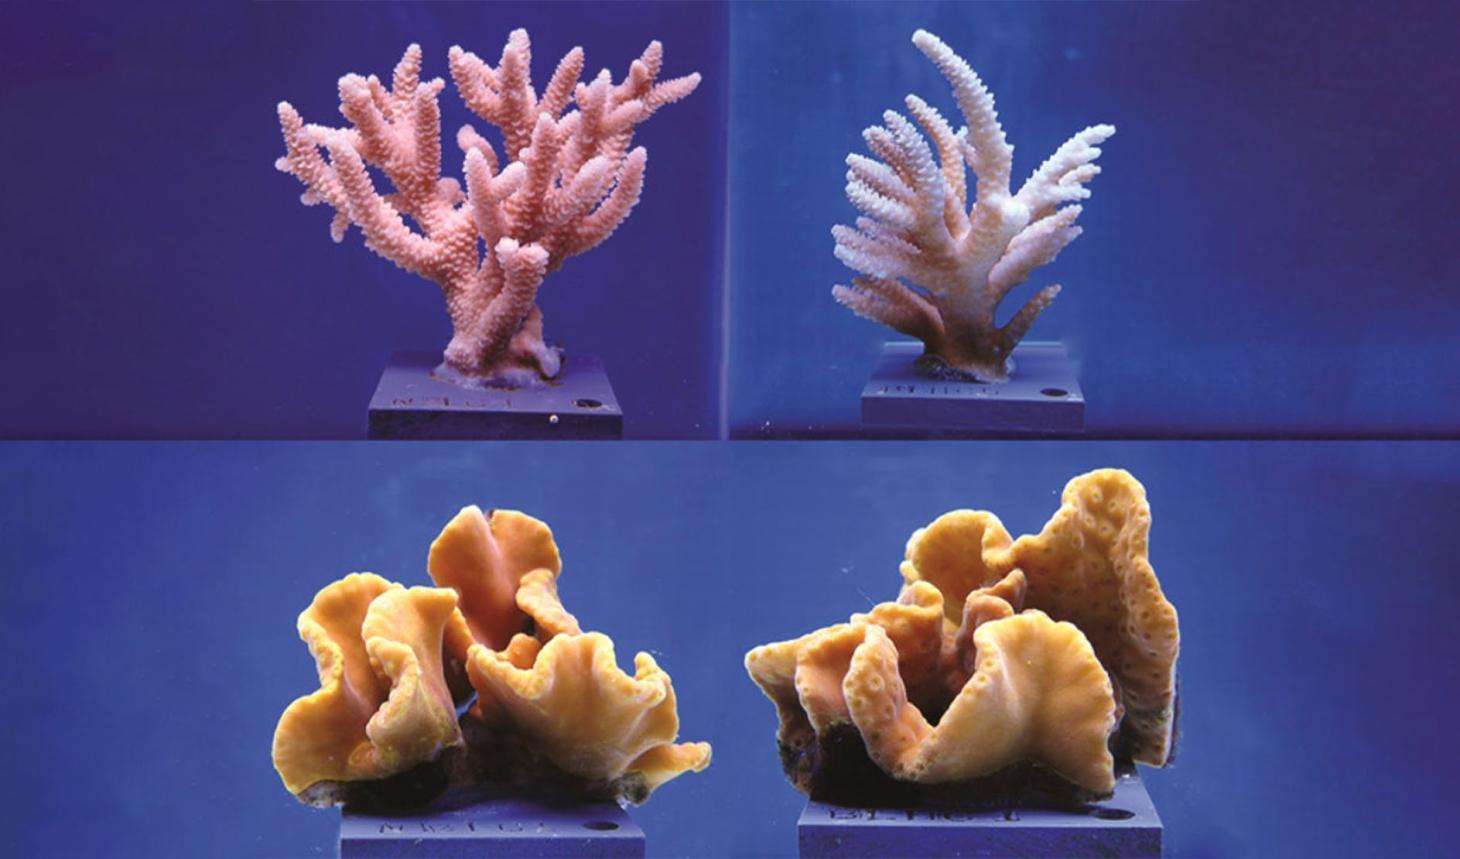 Coral displayed in front of a blue backdrop.